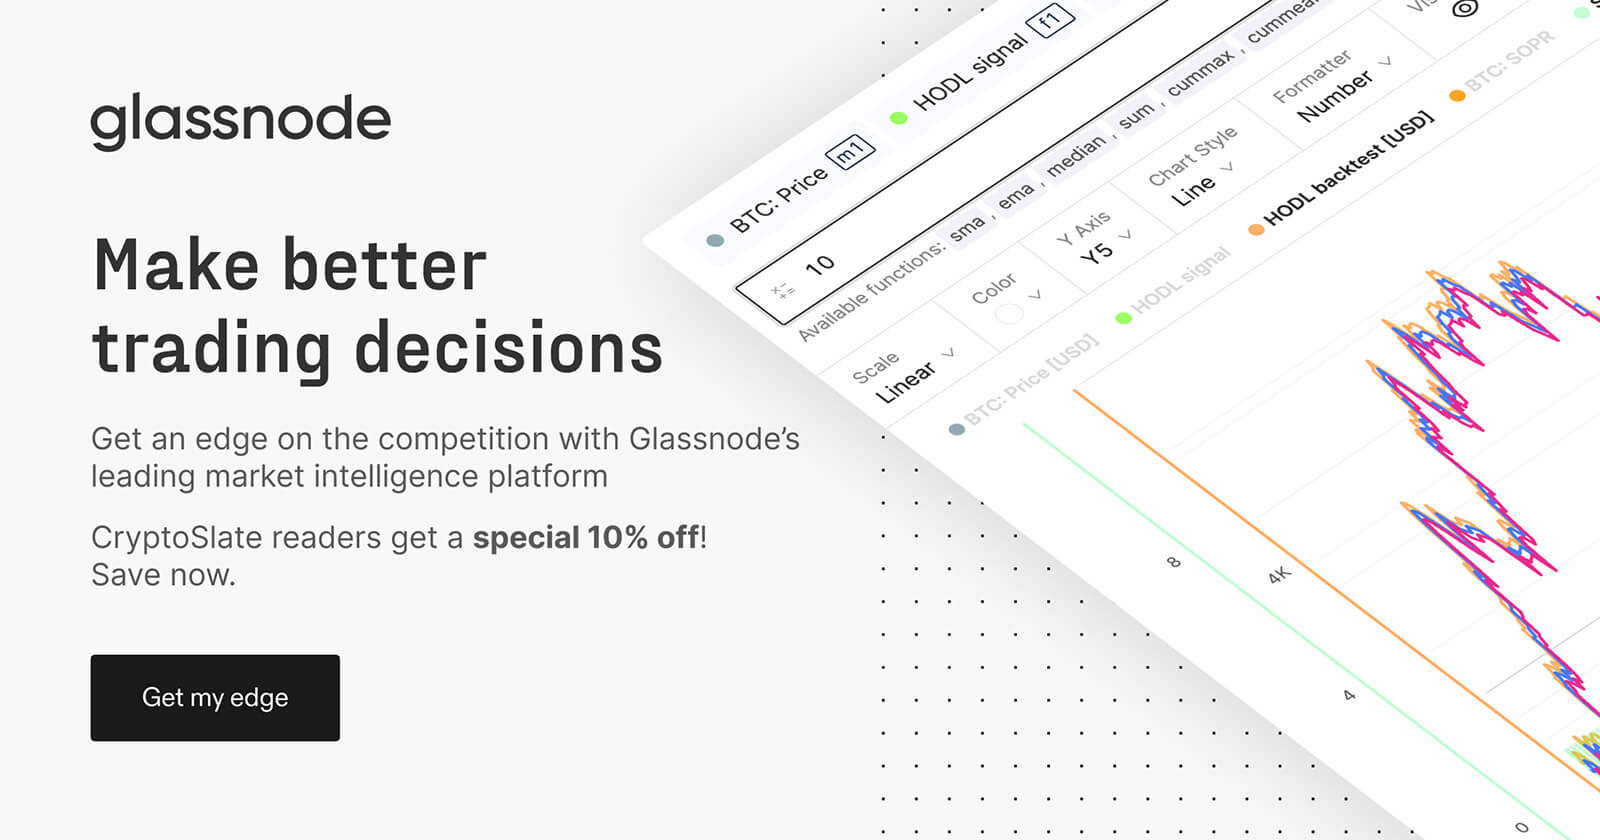 Make better trading decisions with Glassnode